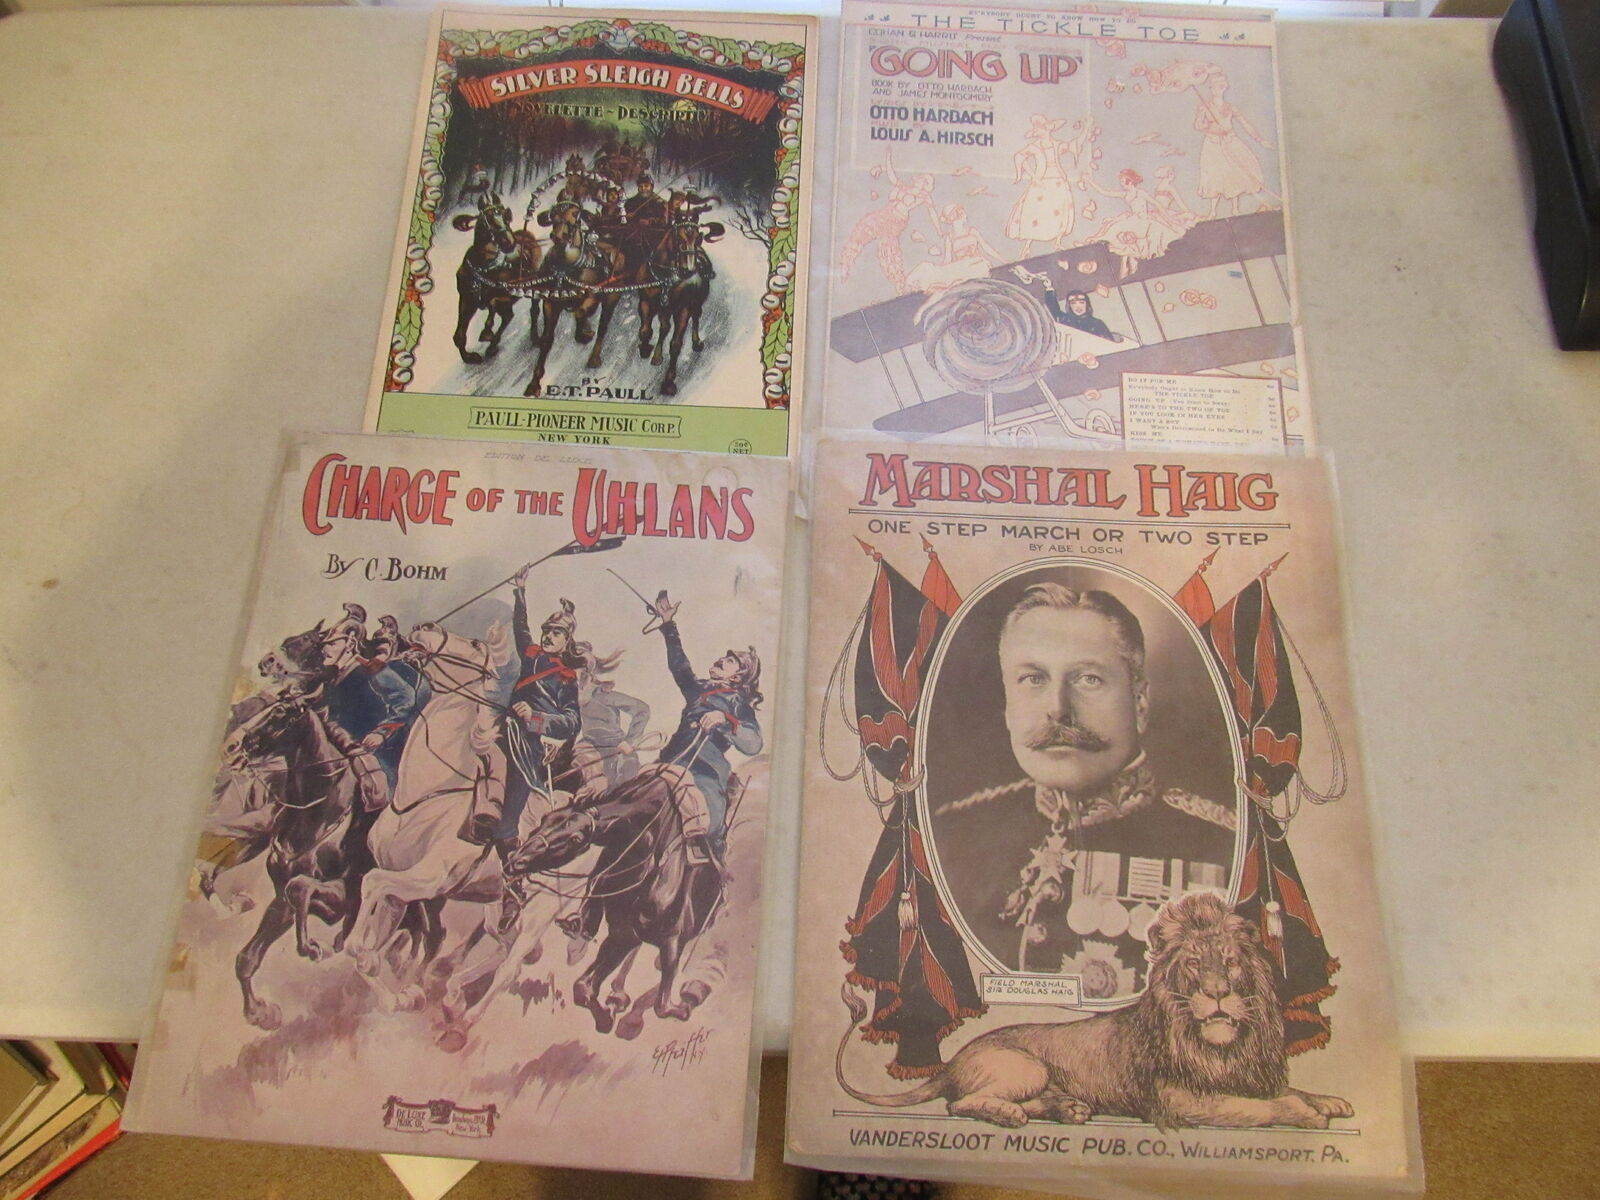 Lot of 4 Vintage Sheet Music ~ Silver Sleigh Bells, Charge of the Villans etc